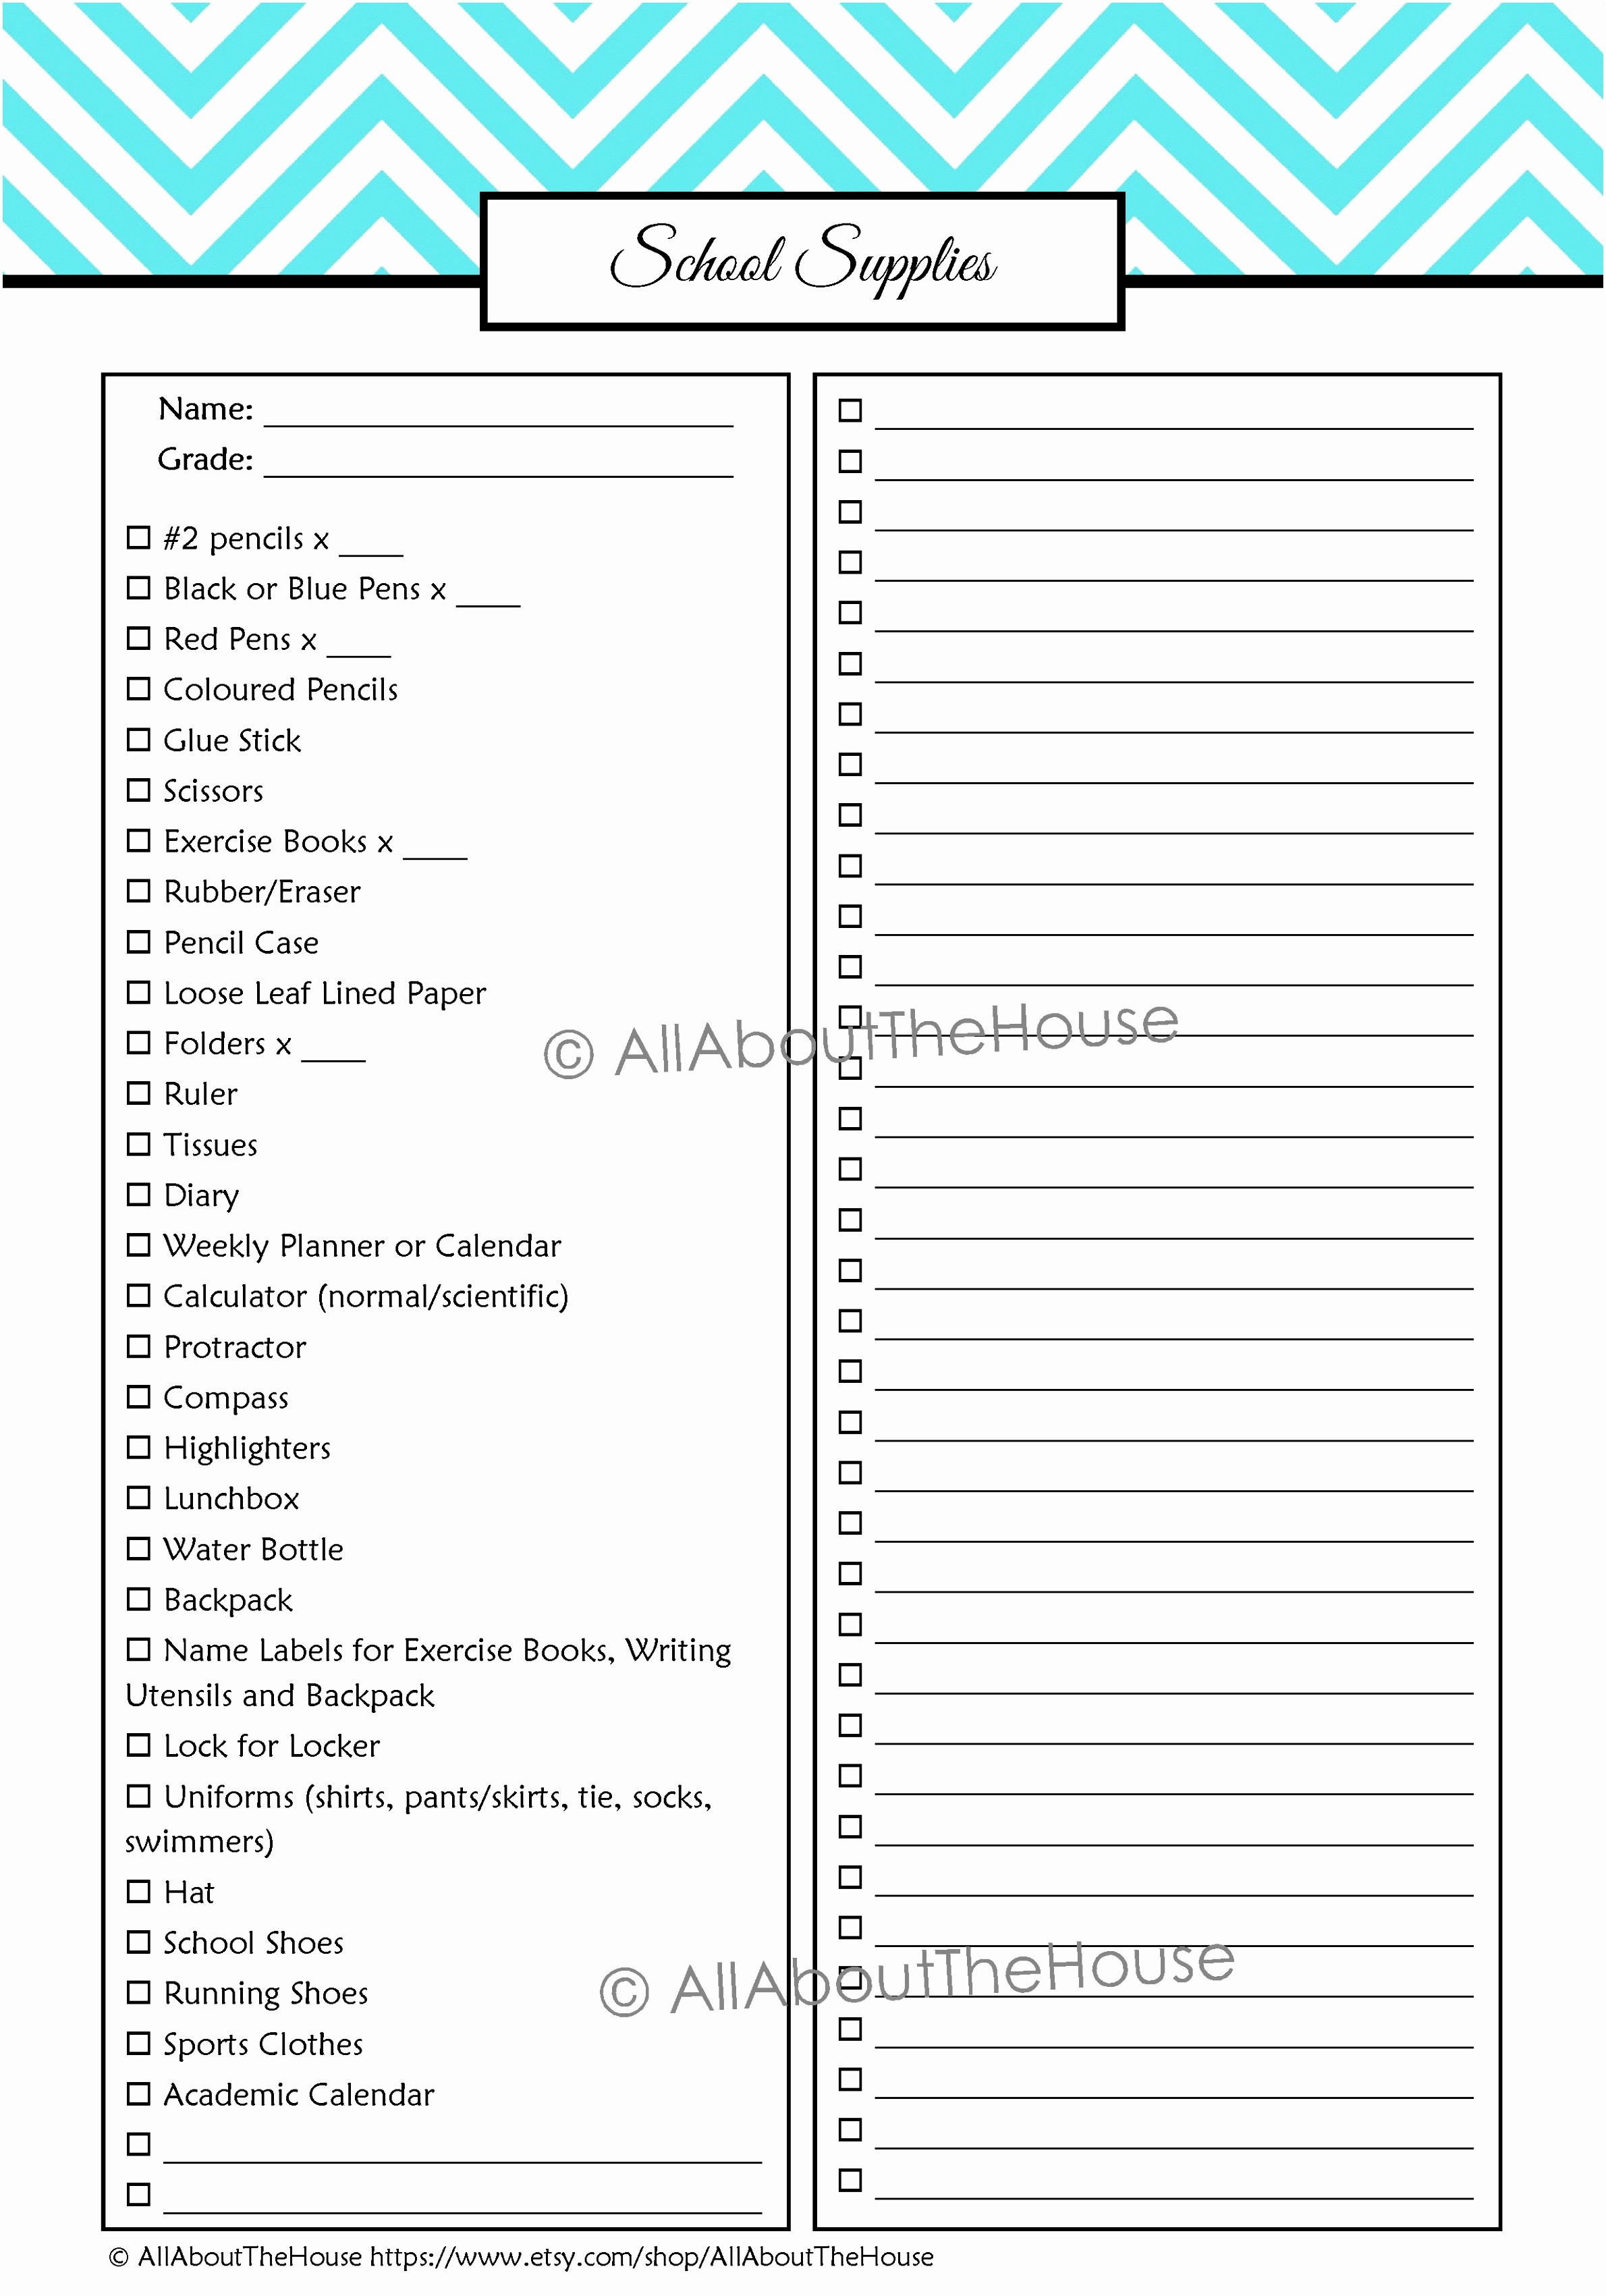 Office Supply order List Template Unique 9 Fice Supply order form Template Eutlp